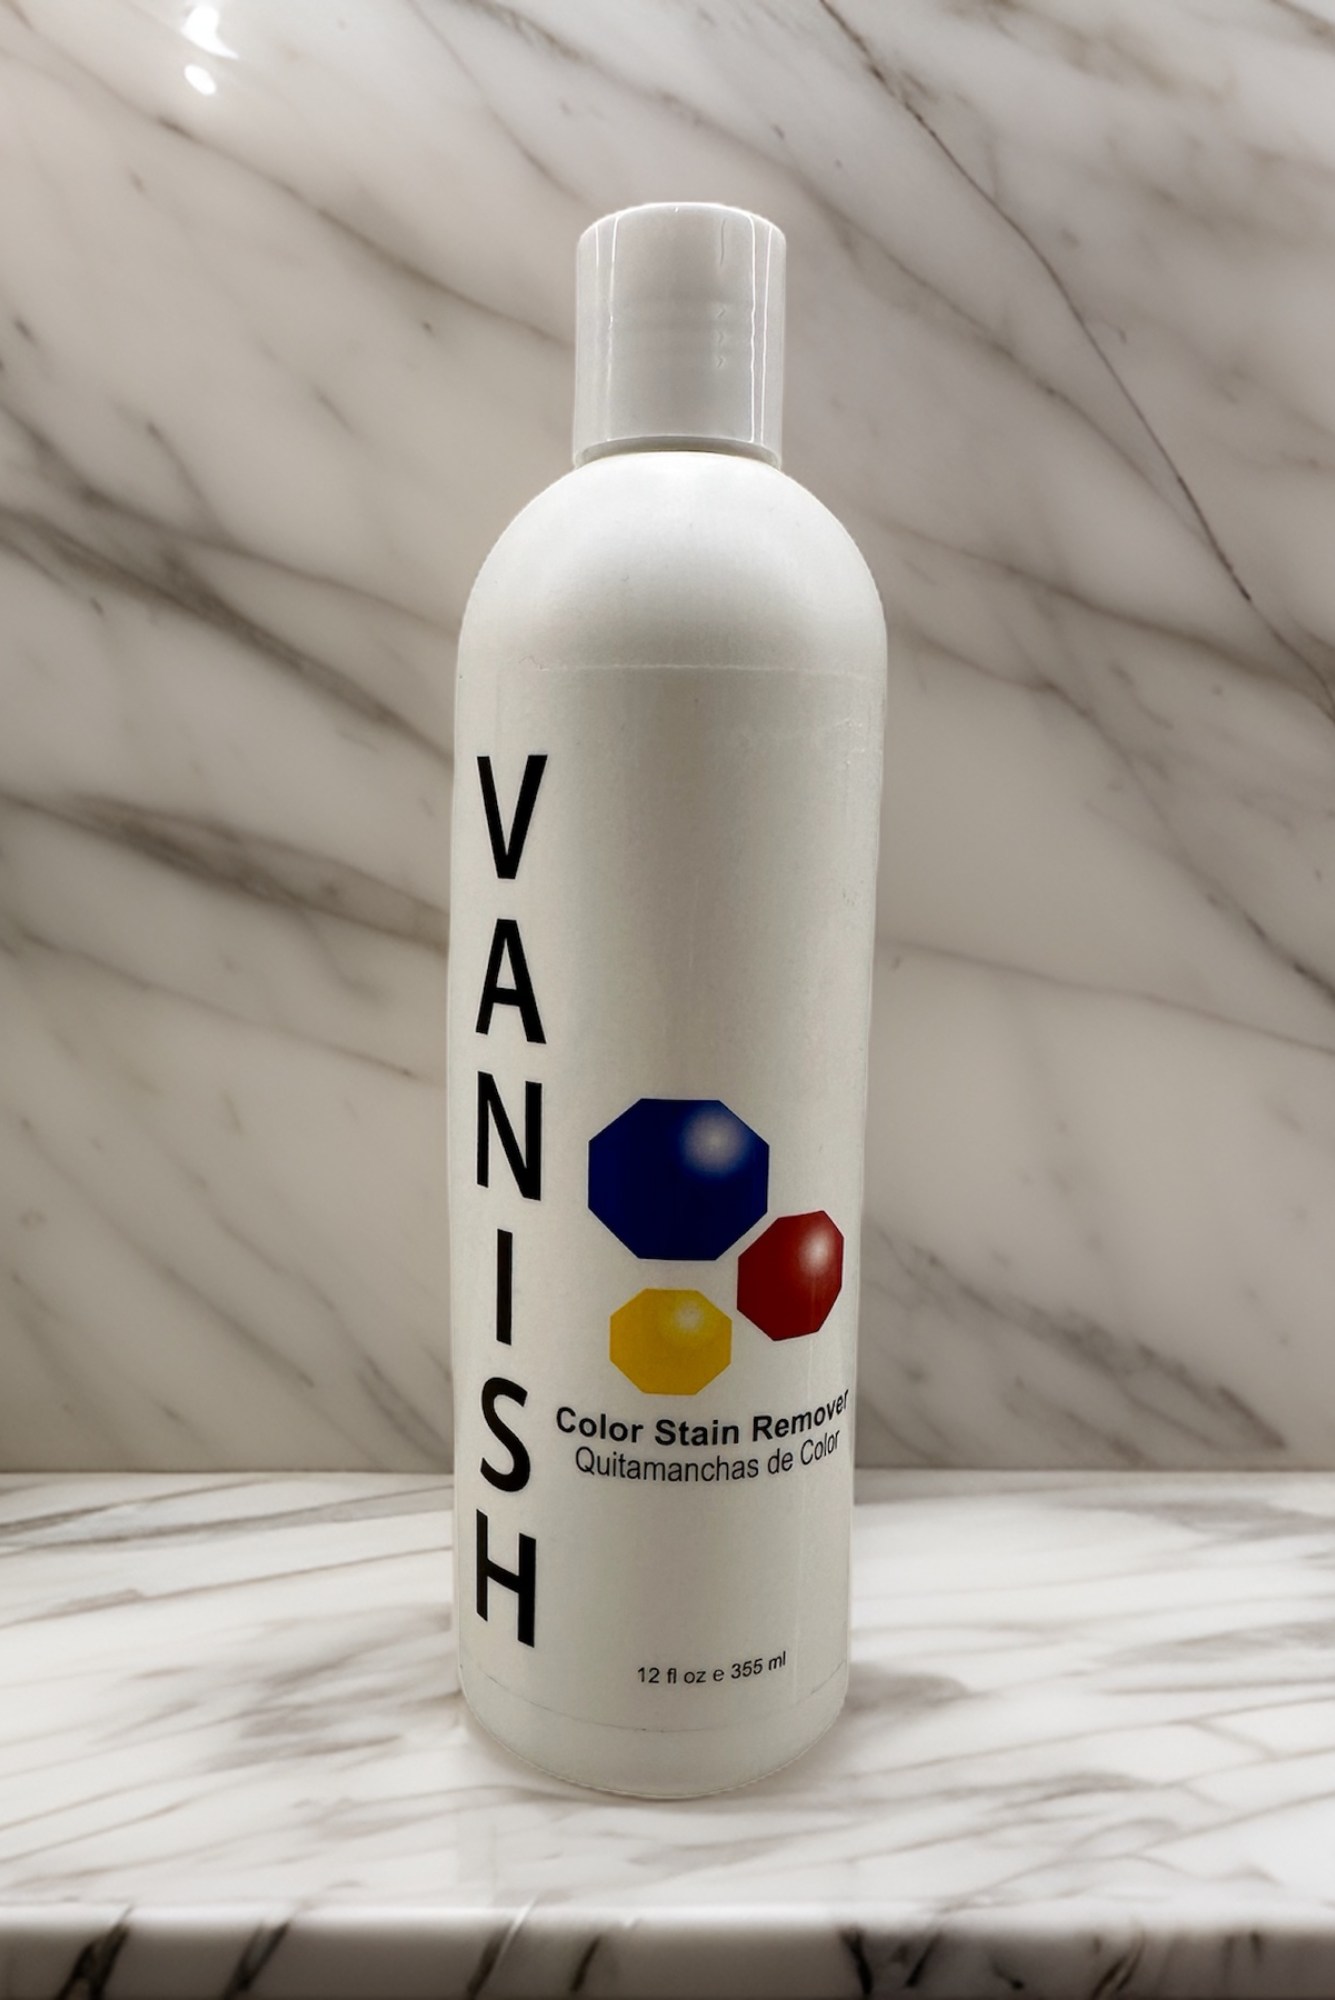 vanish_color_stain_remover-1_1705065933358